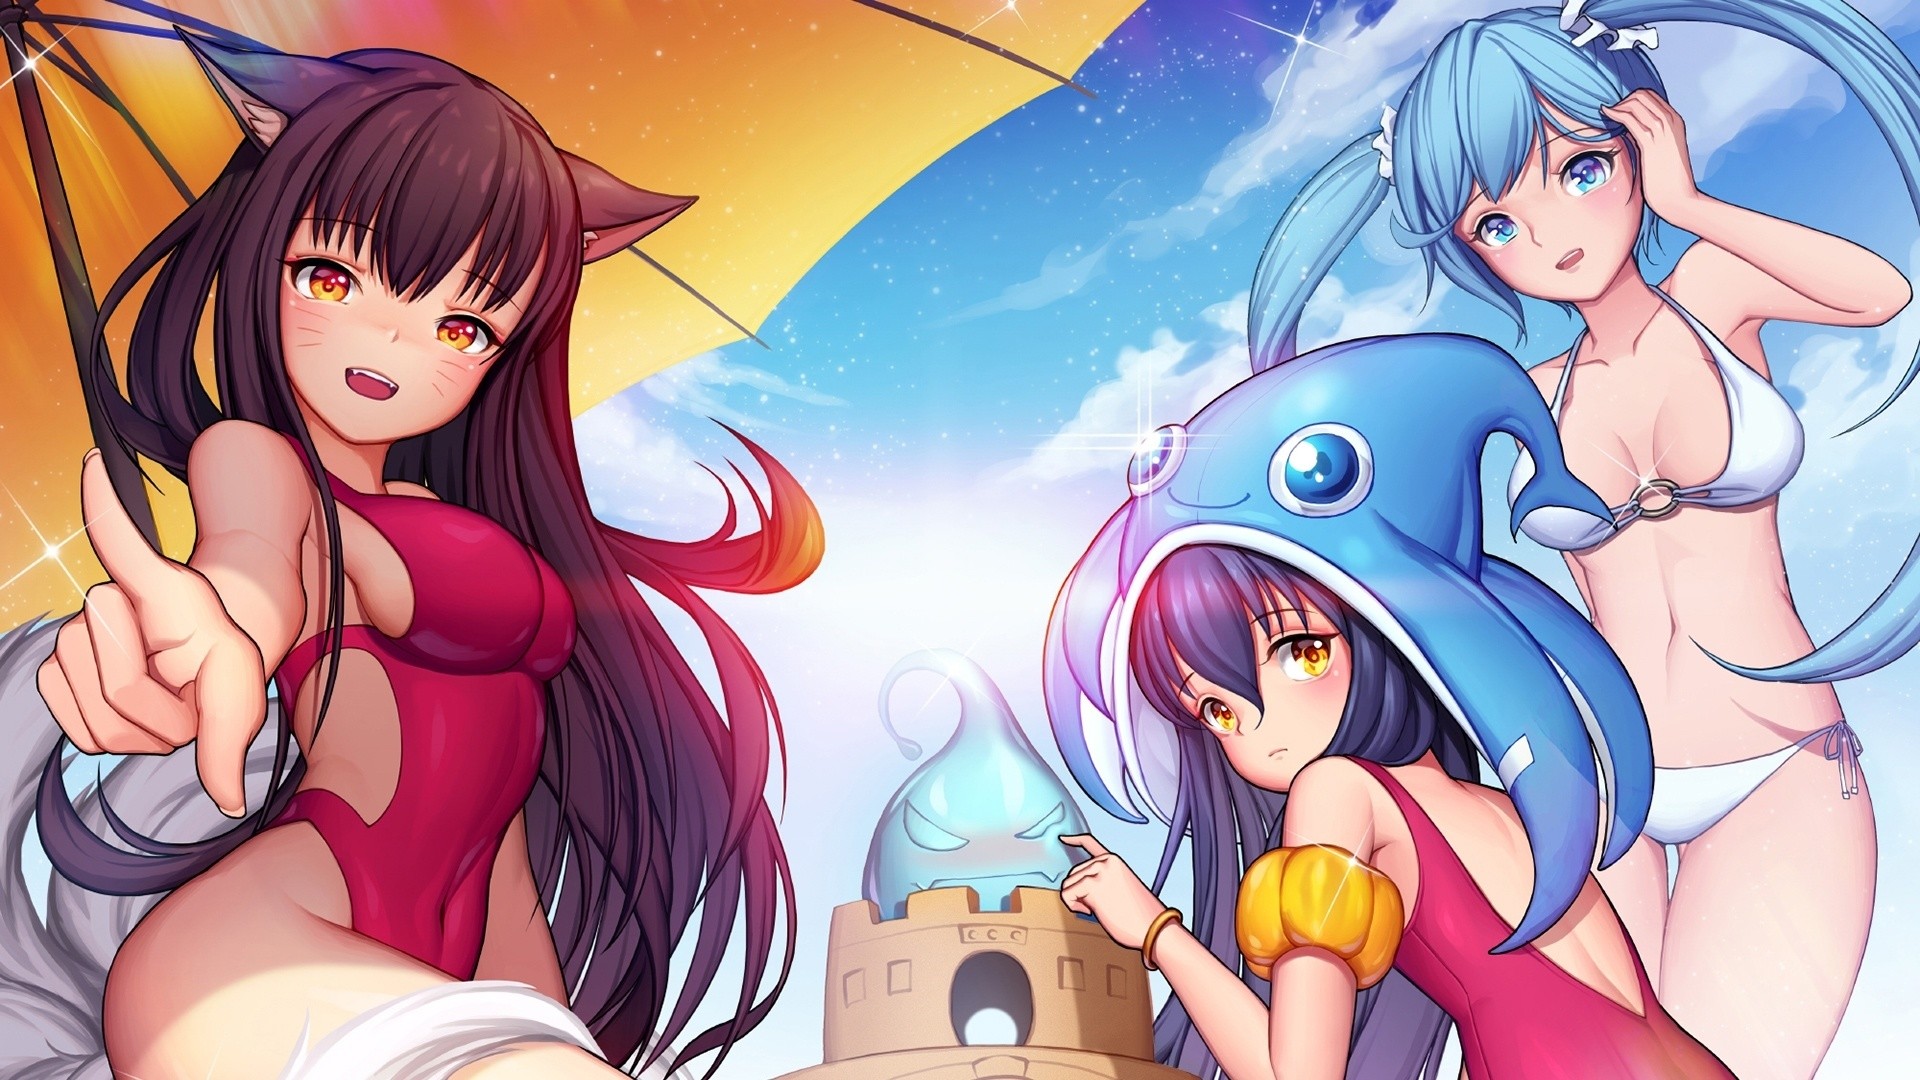 1920x1080 Video Game Backgrounds, Ahri Lulu And Sona Pool Party, Video Game, League Of